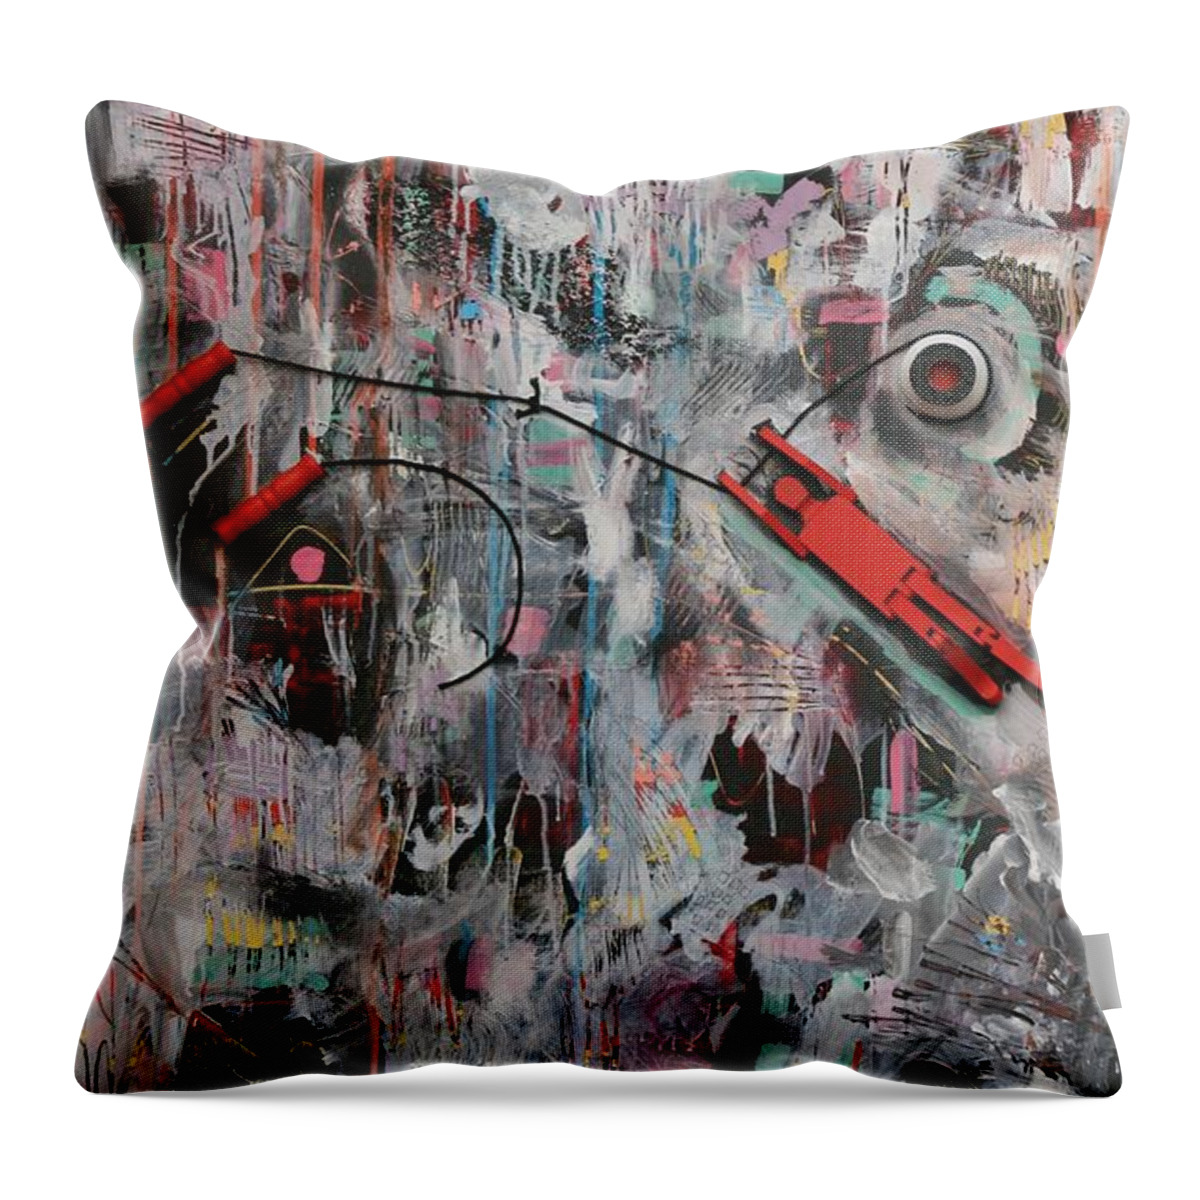 Mixed Media Abstract Throw Pillow featuring the mixed media By a Thread by Jean Clarke